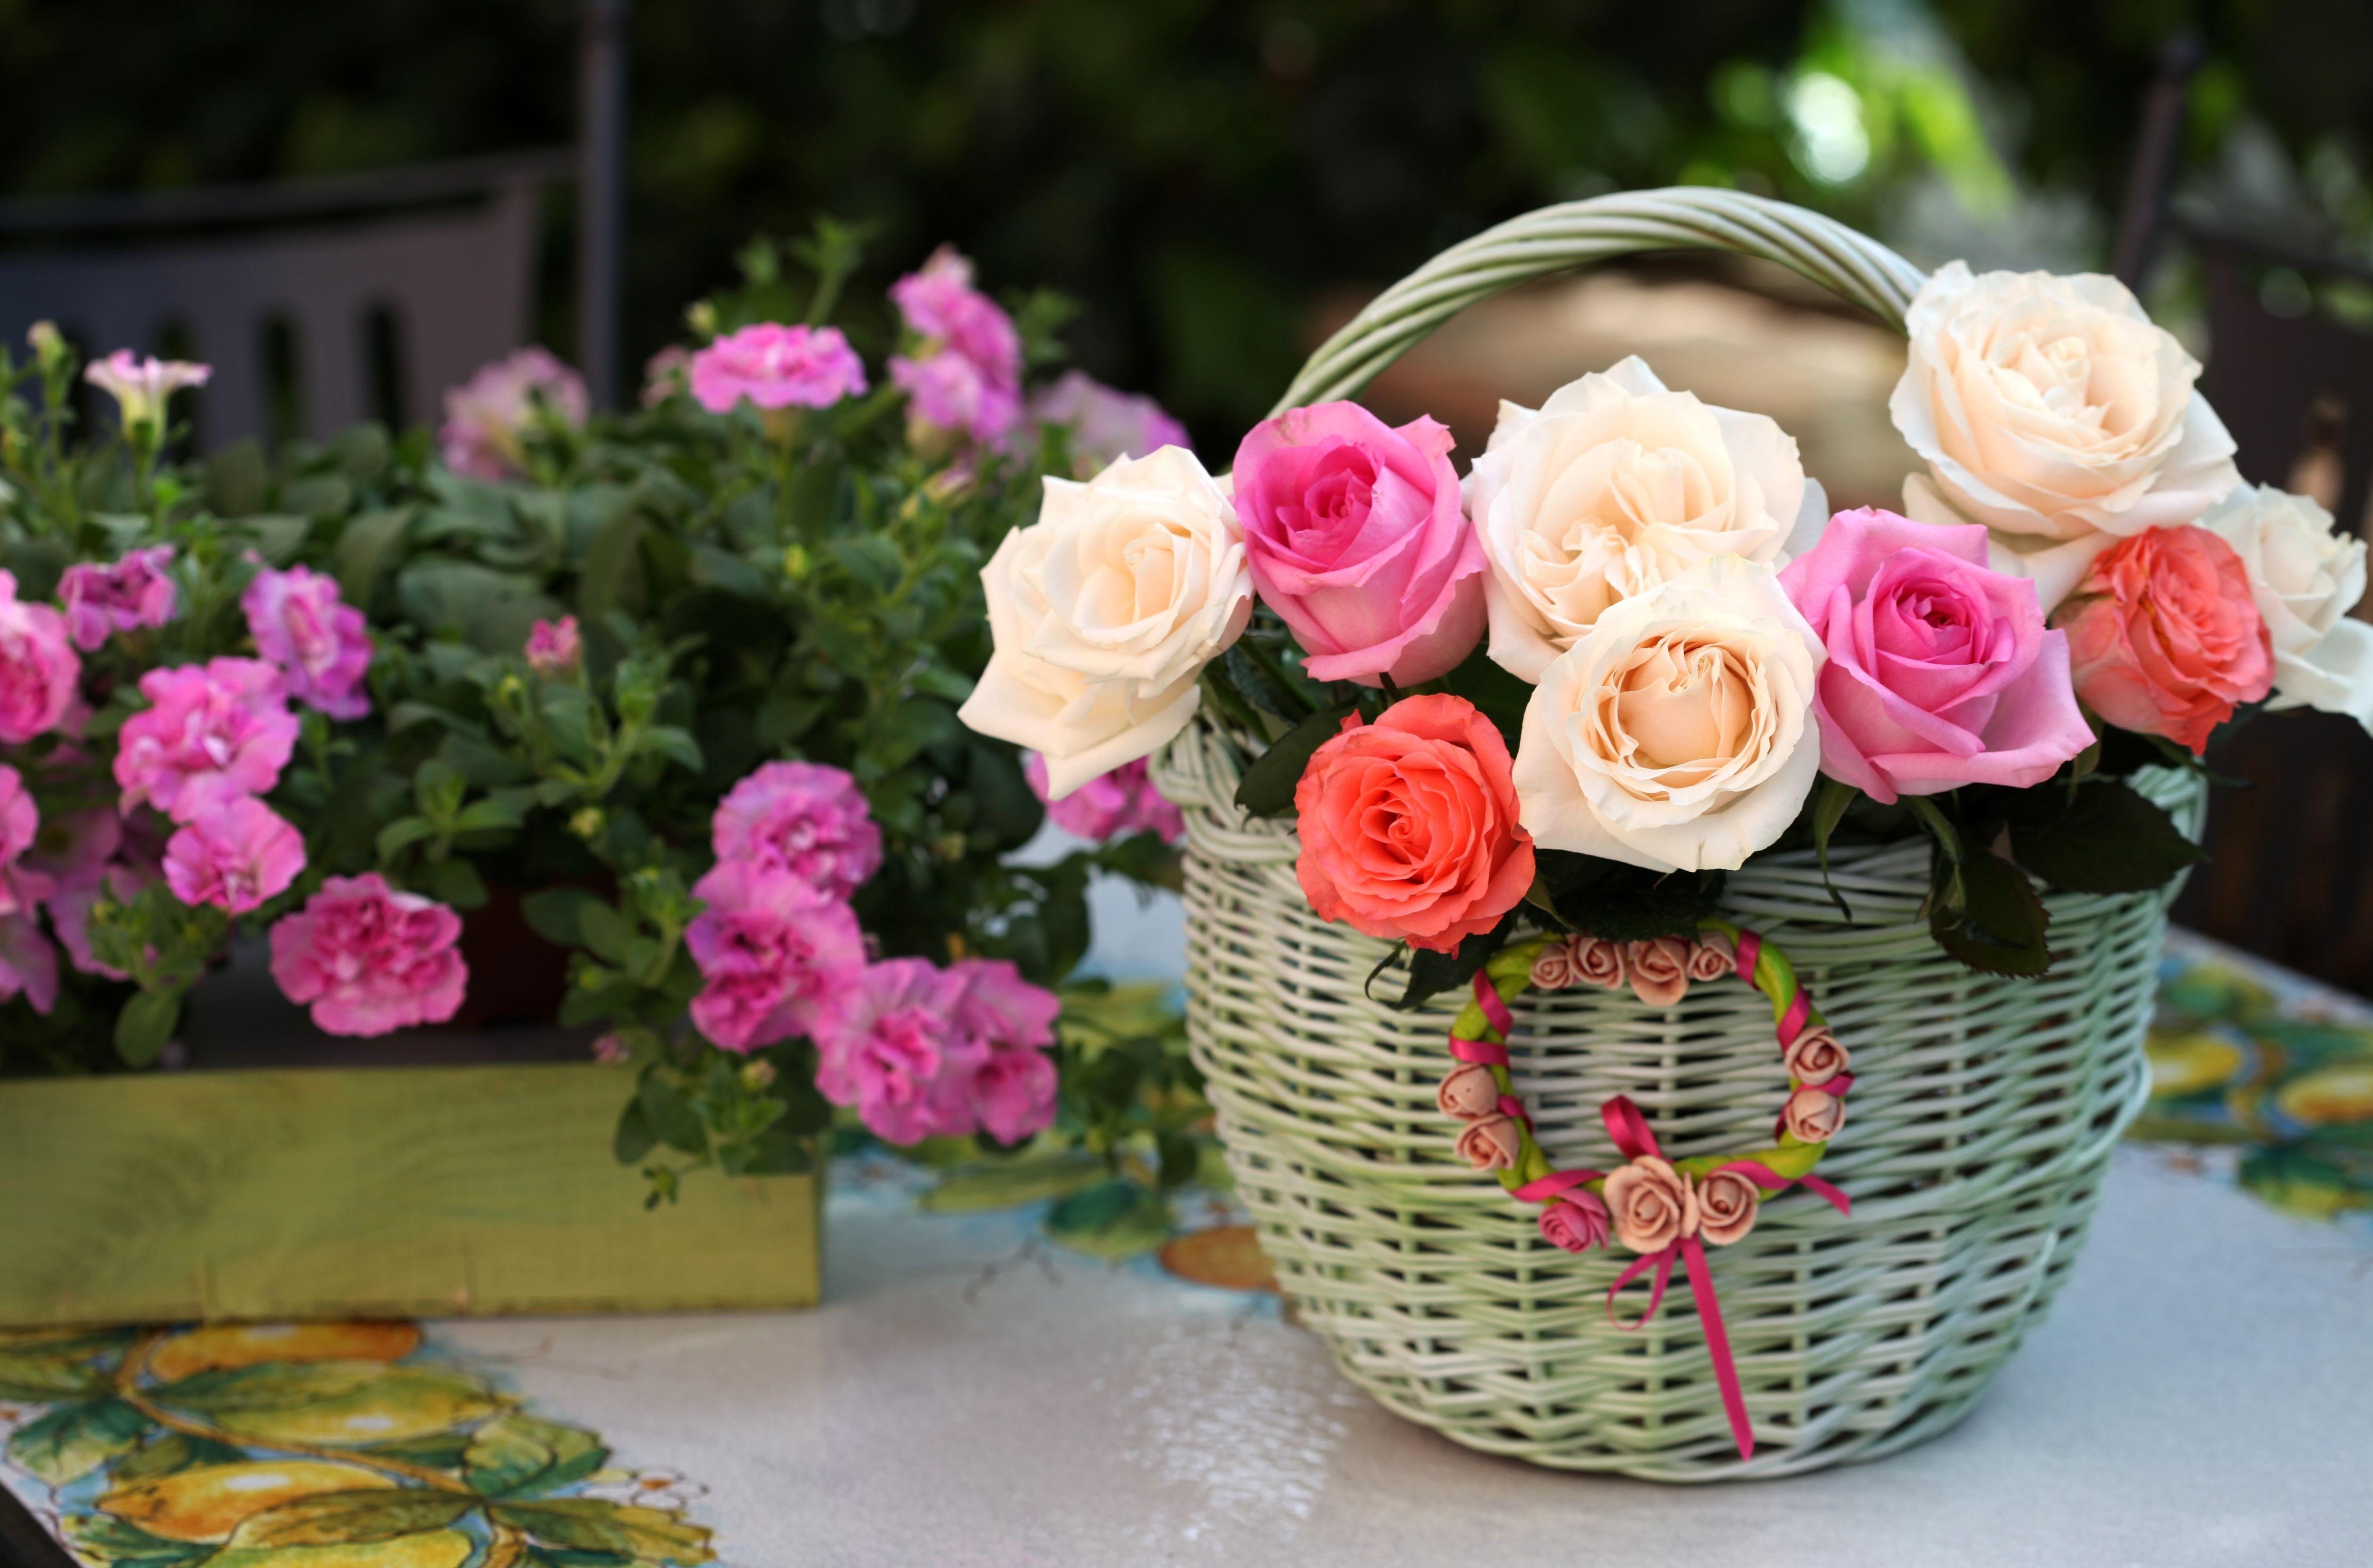 flowers, roses, basket, composition, handsomely, it's beautiful